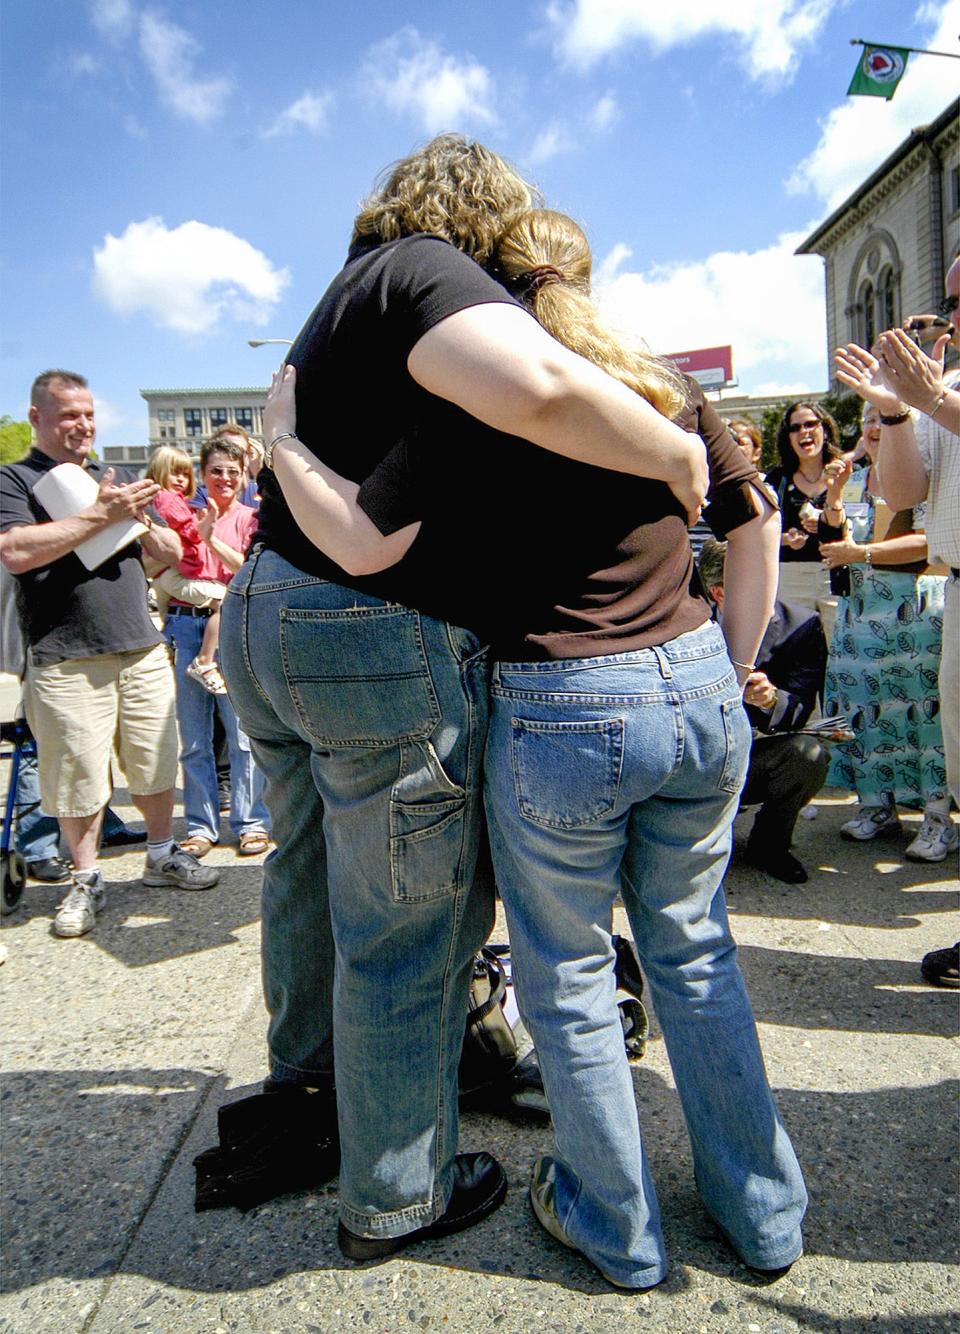 Donna Lockington and Kaitlyn Shusas, both of Worcester, embrace following their marriage ceremony in front of City Hall May 17, 2004. According to Steve Pratt, their justice of the peace, Lockington and Shusas were the first gay couple to officially marry in Worcester.